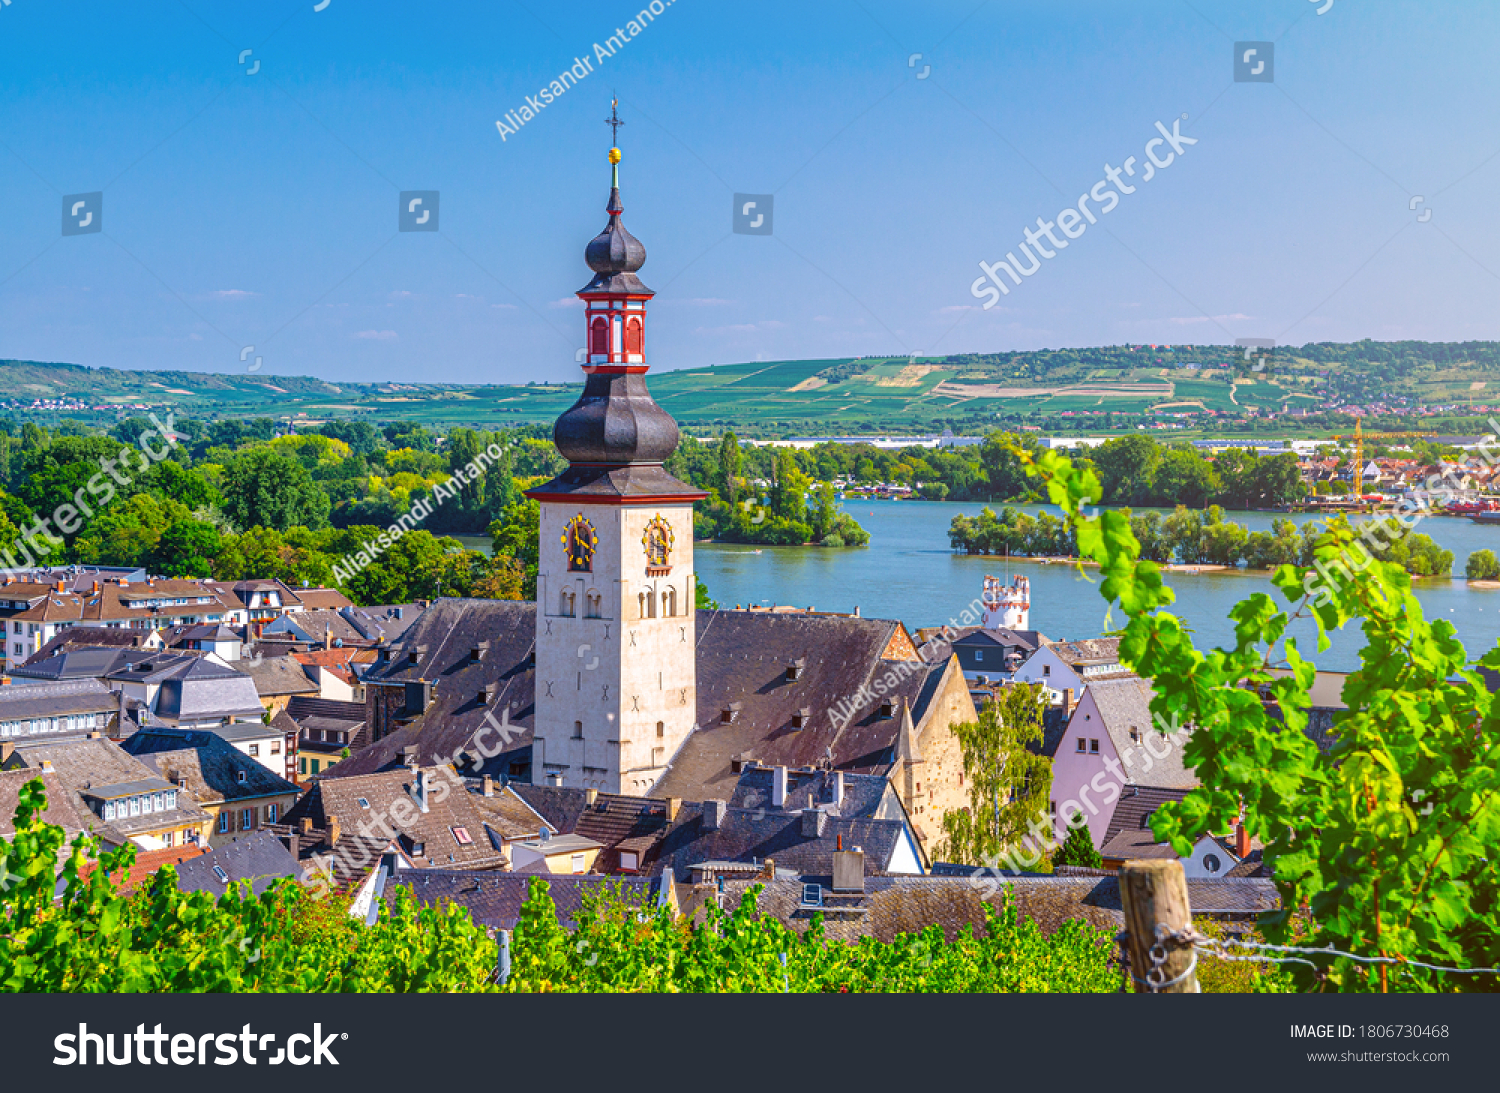 Aerial view of Rudesheim am Rhein historical town centre with clock tower spire of St. Jakobus catholic church and Rhine river, blue sky background, Rhineland-Palatinate and Hesse states, Germany #1806730468